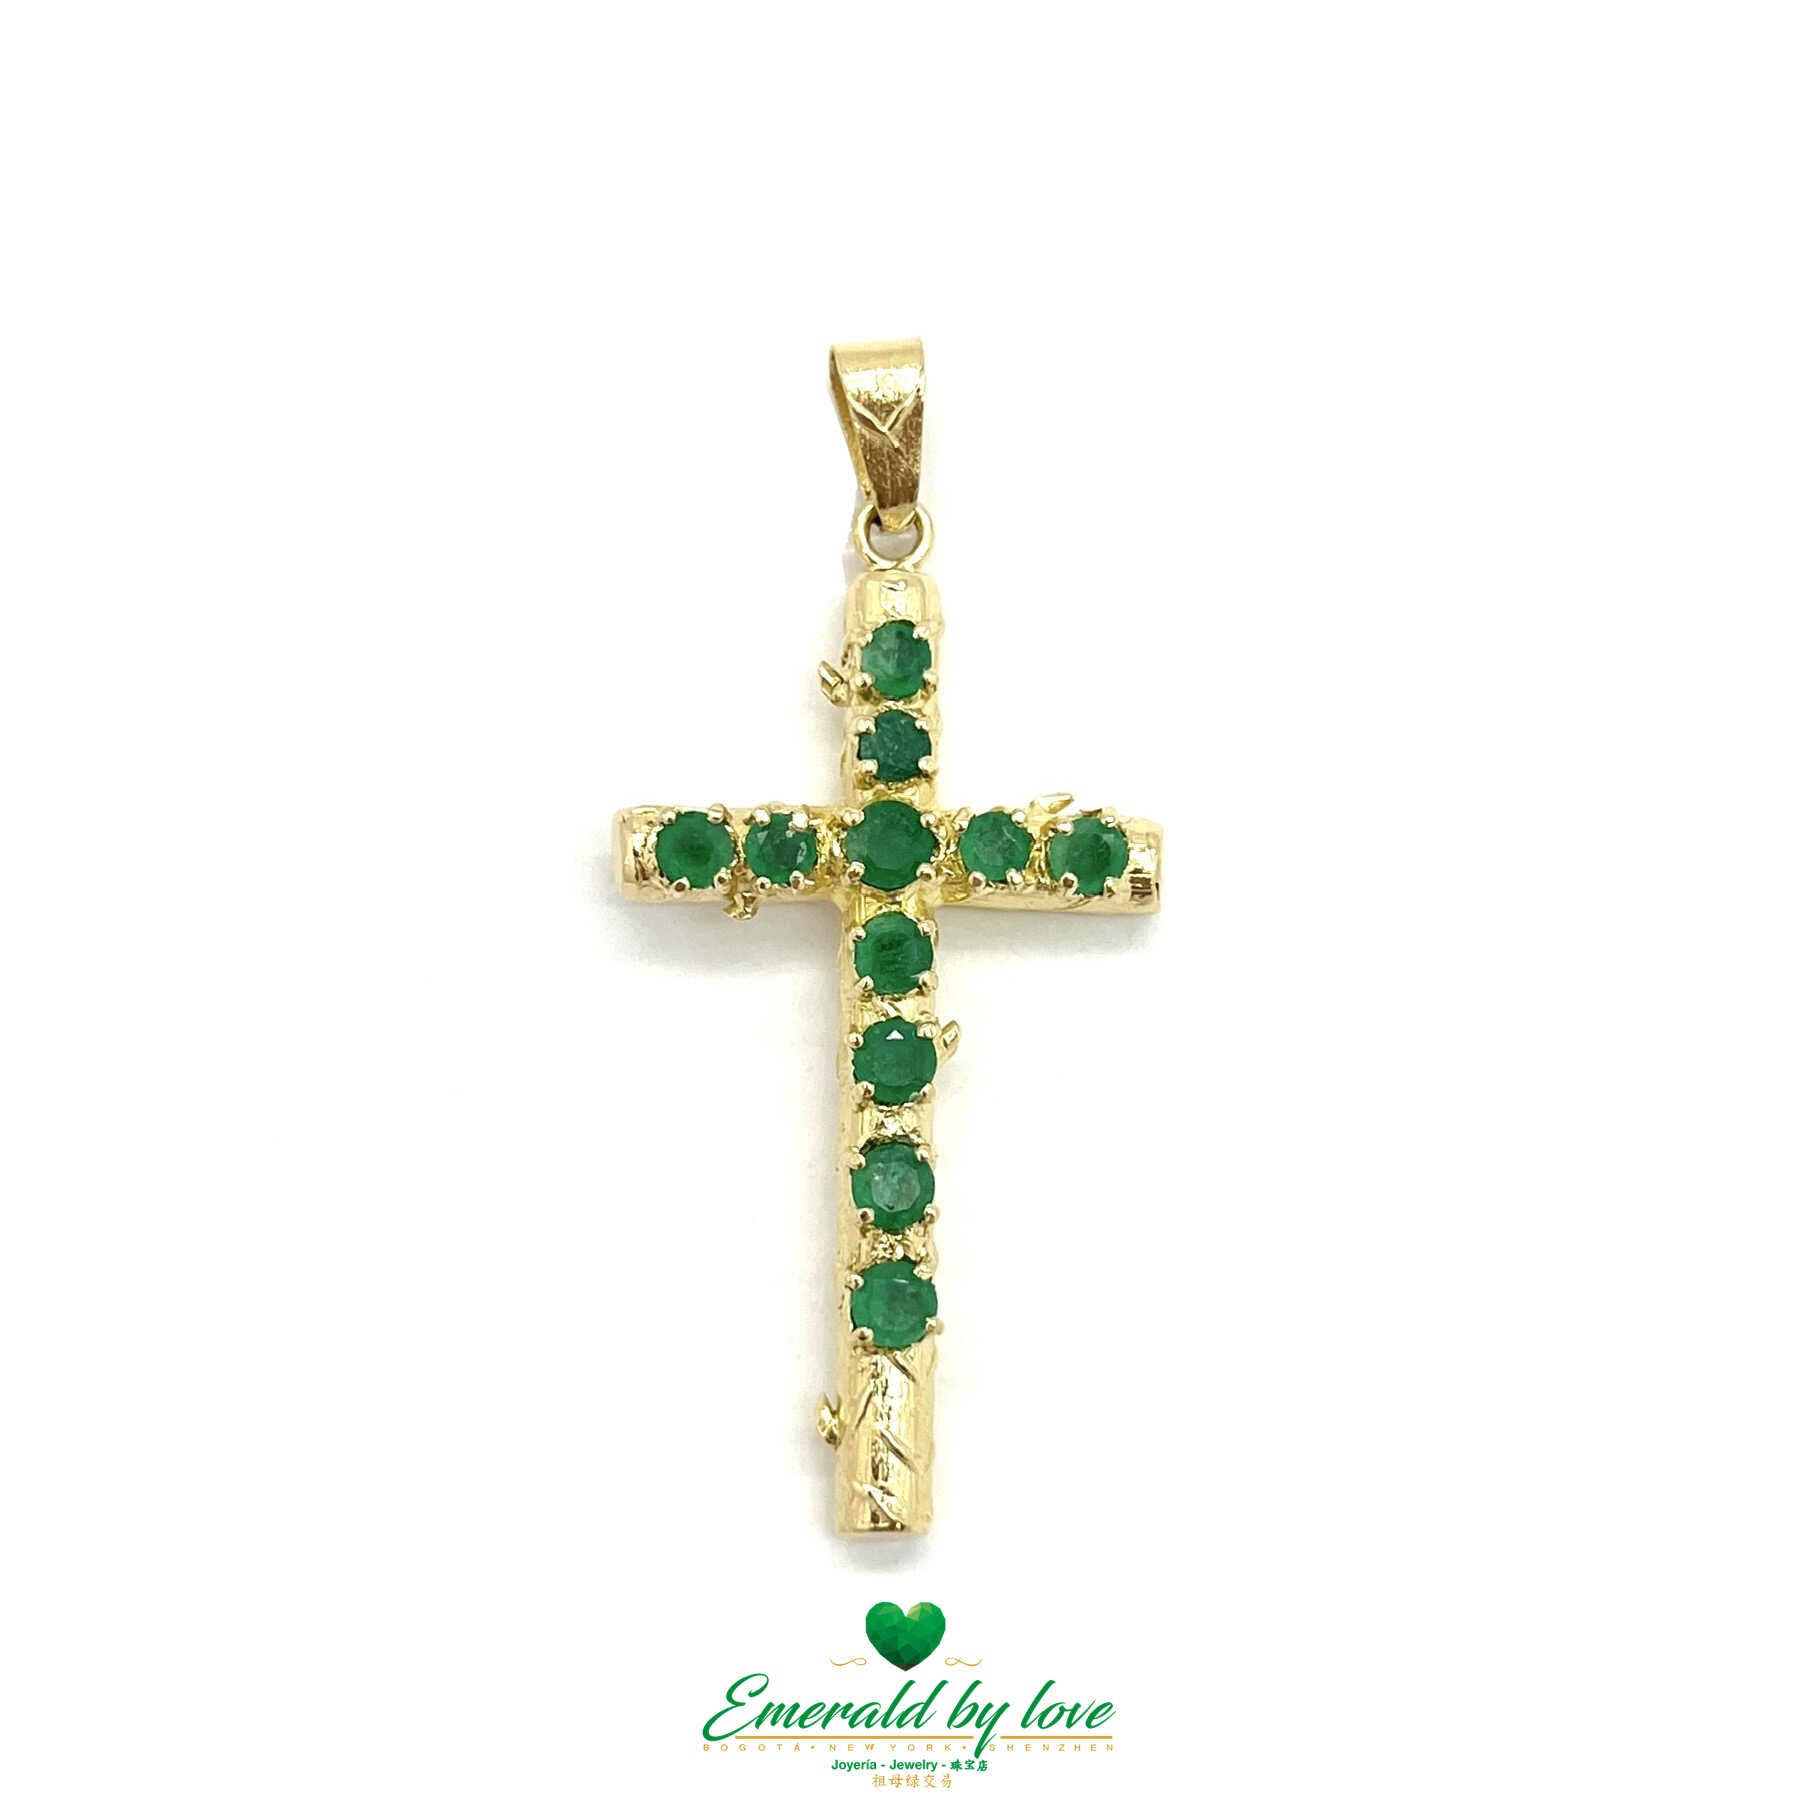 Exquisite 18k Yellow Gold Cross Pendant with Natural Colombian Emeralds